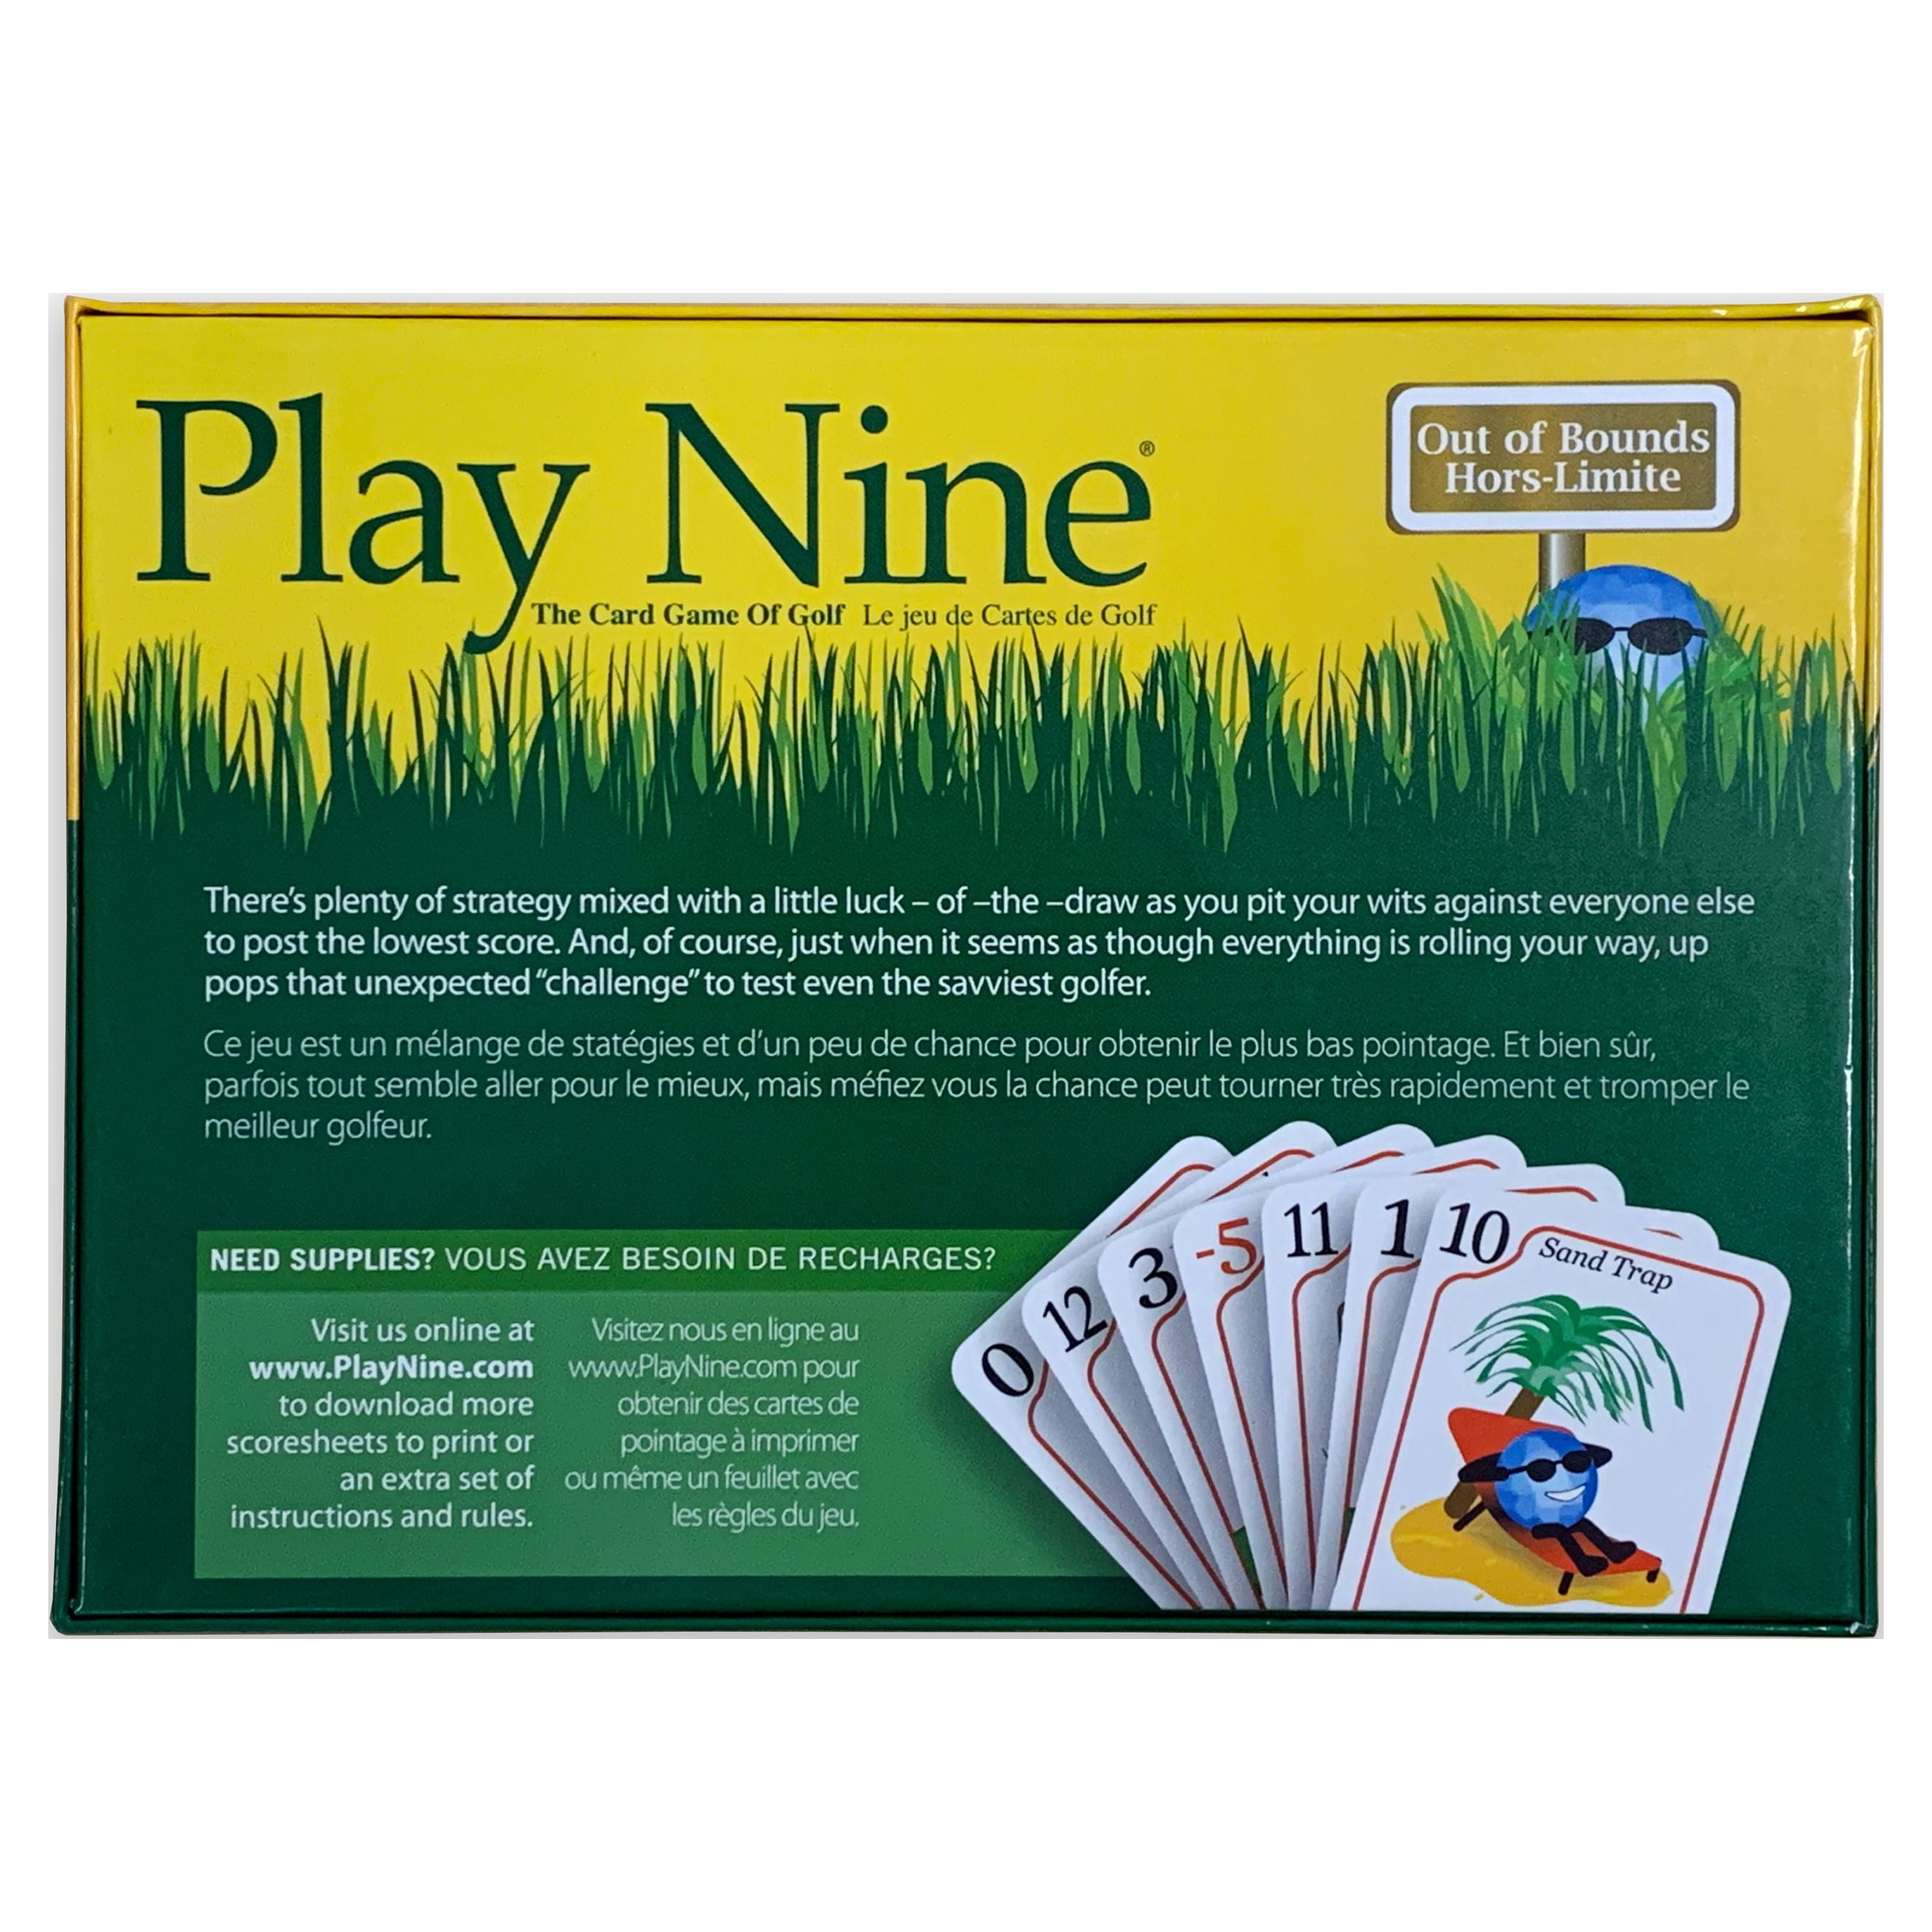 Golf Card Game Rules (Printable): How to play 9, 6 & 4 Golf